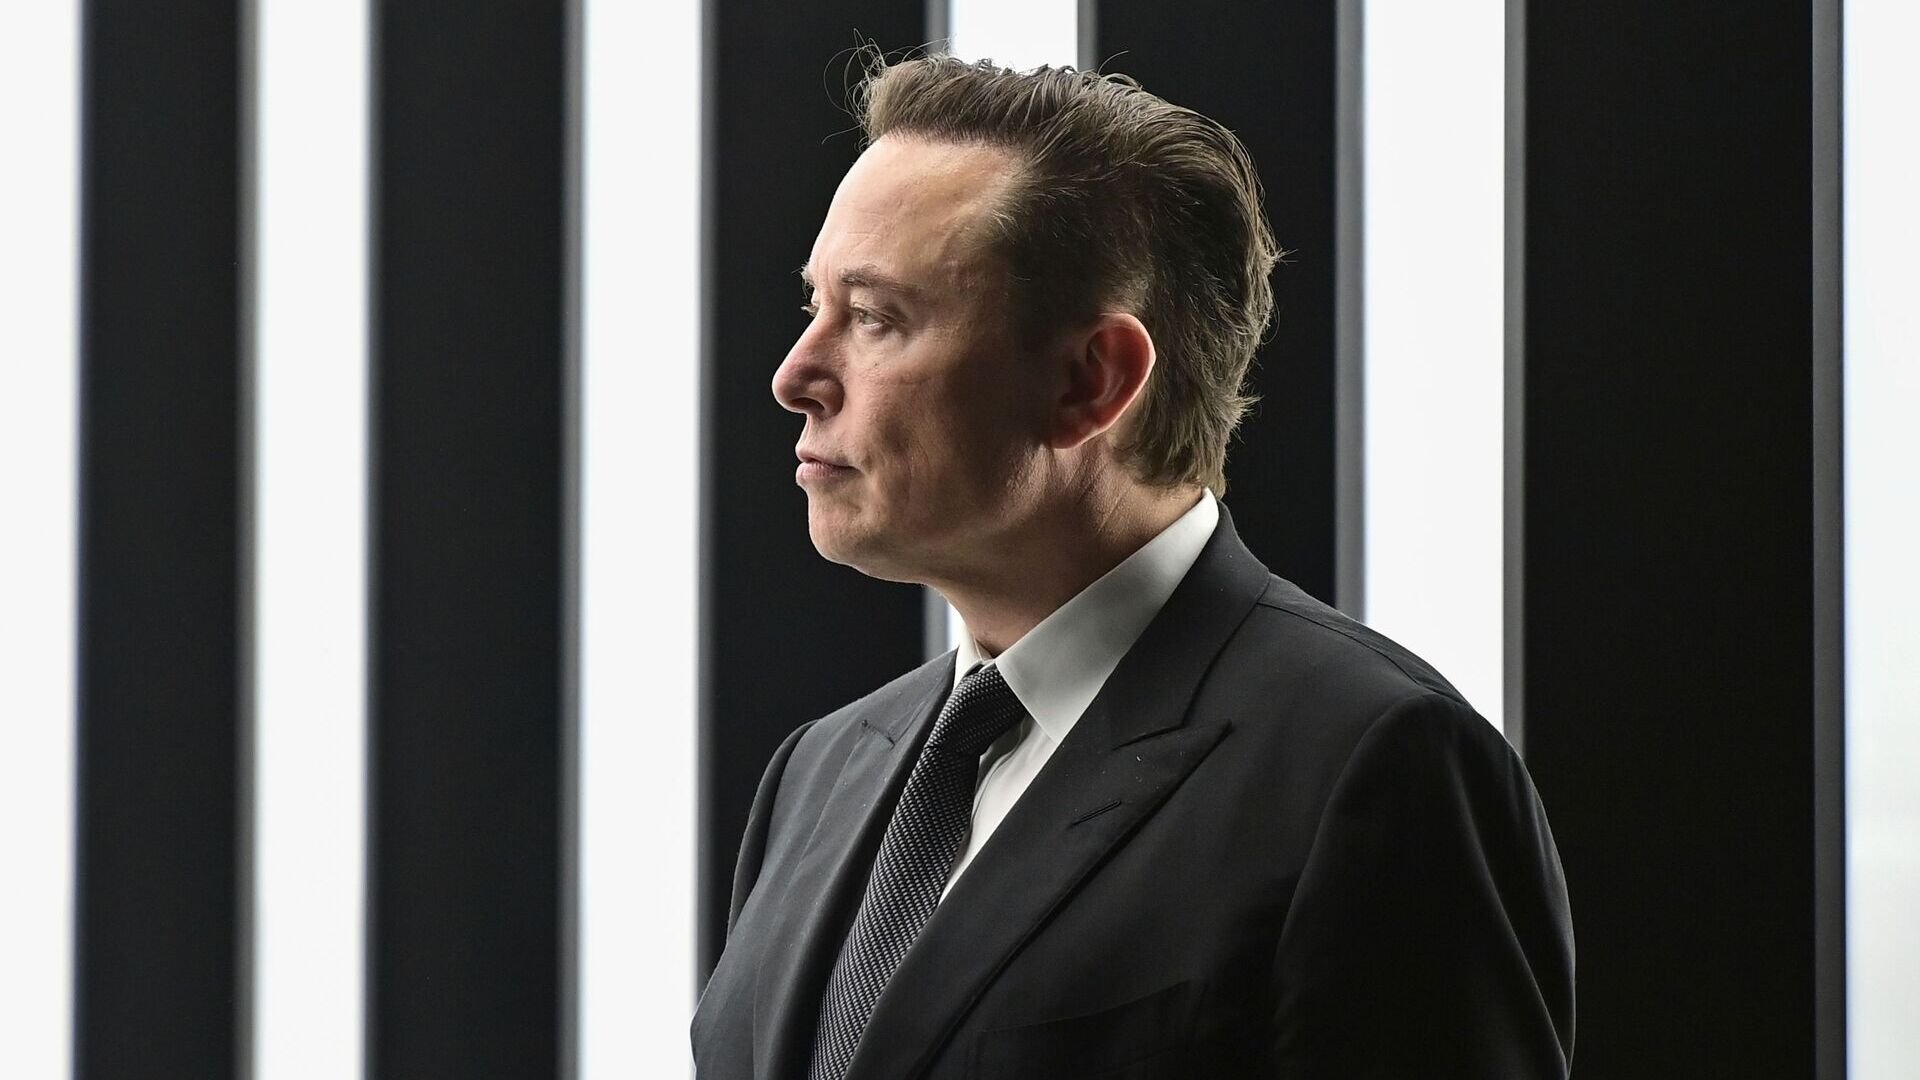 Just How Rich Are Elon Musk, Donald Trump and These Other Big Names?